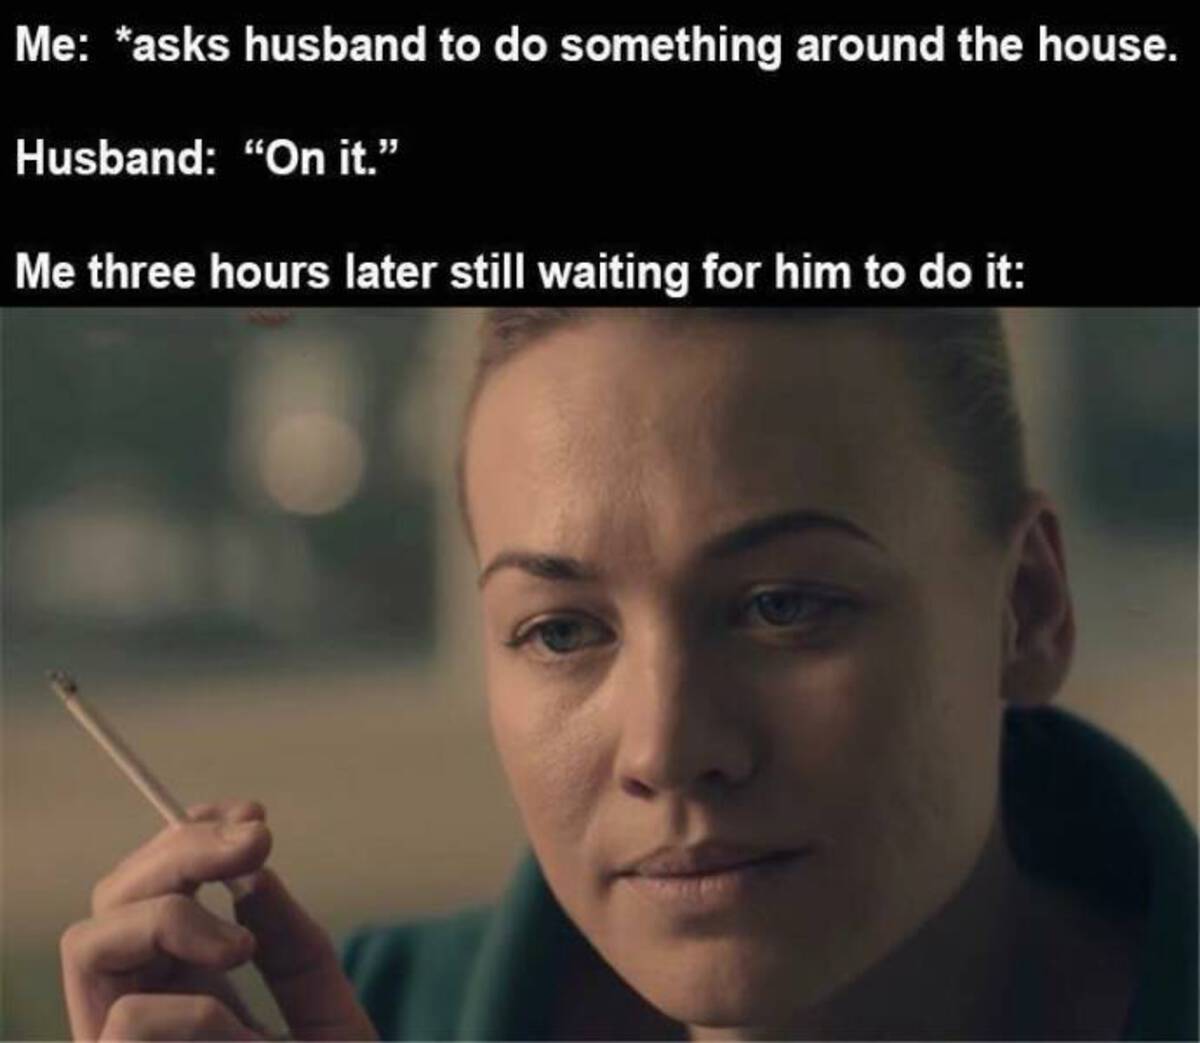 handmaid's tale serena joy cigarettes - Me asks husband to do something around the house. Husband "On it." Me three hours later still waiting for him to do it